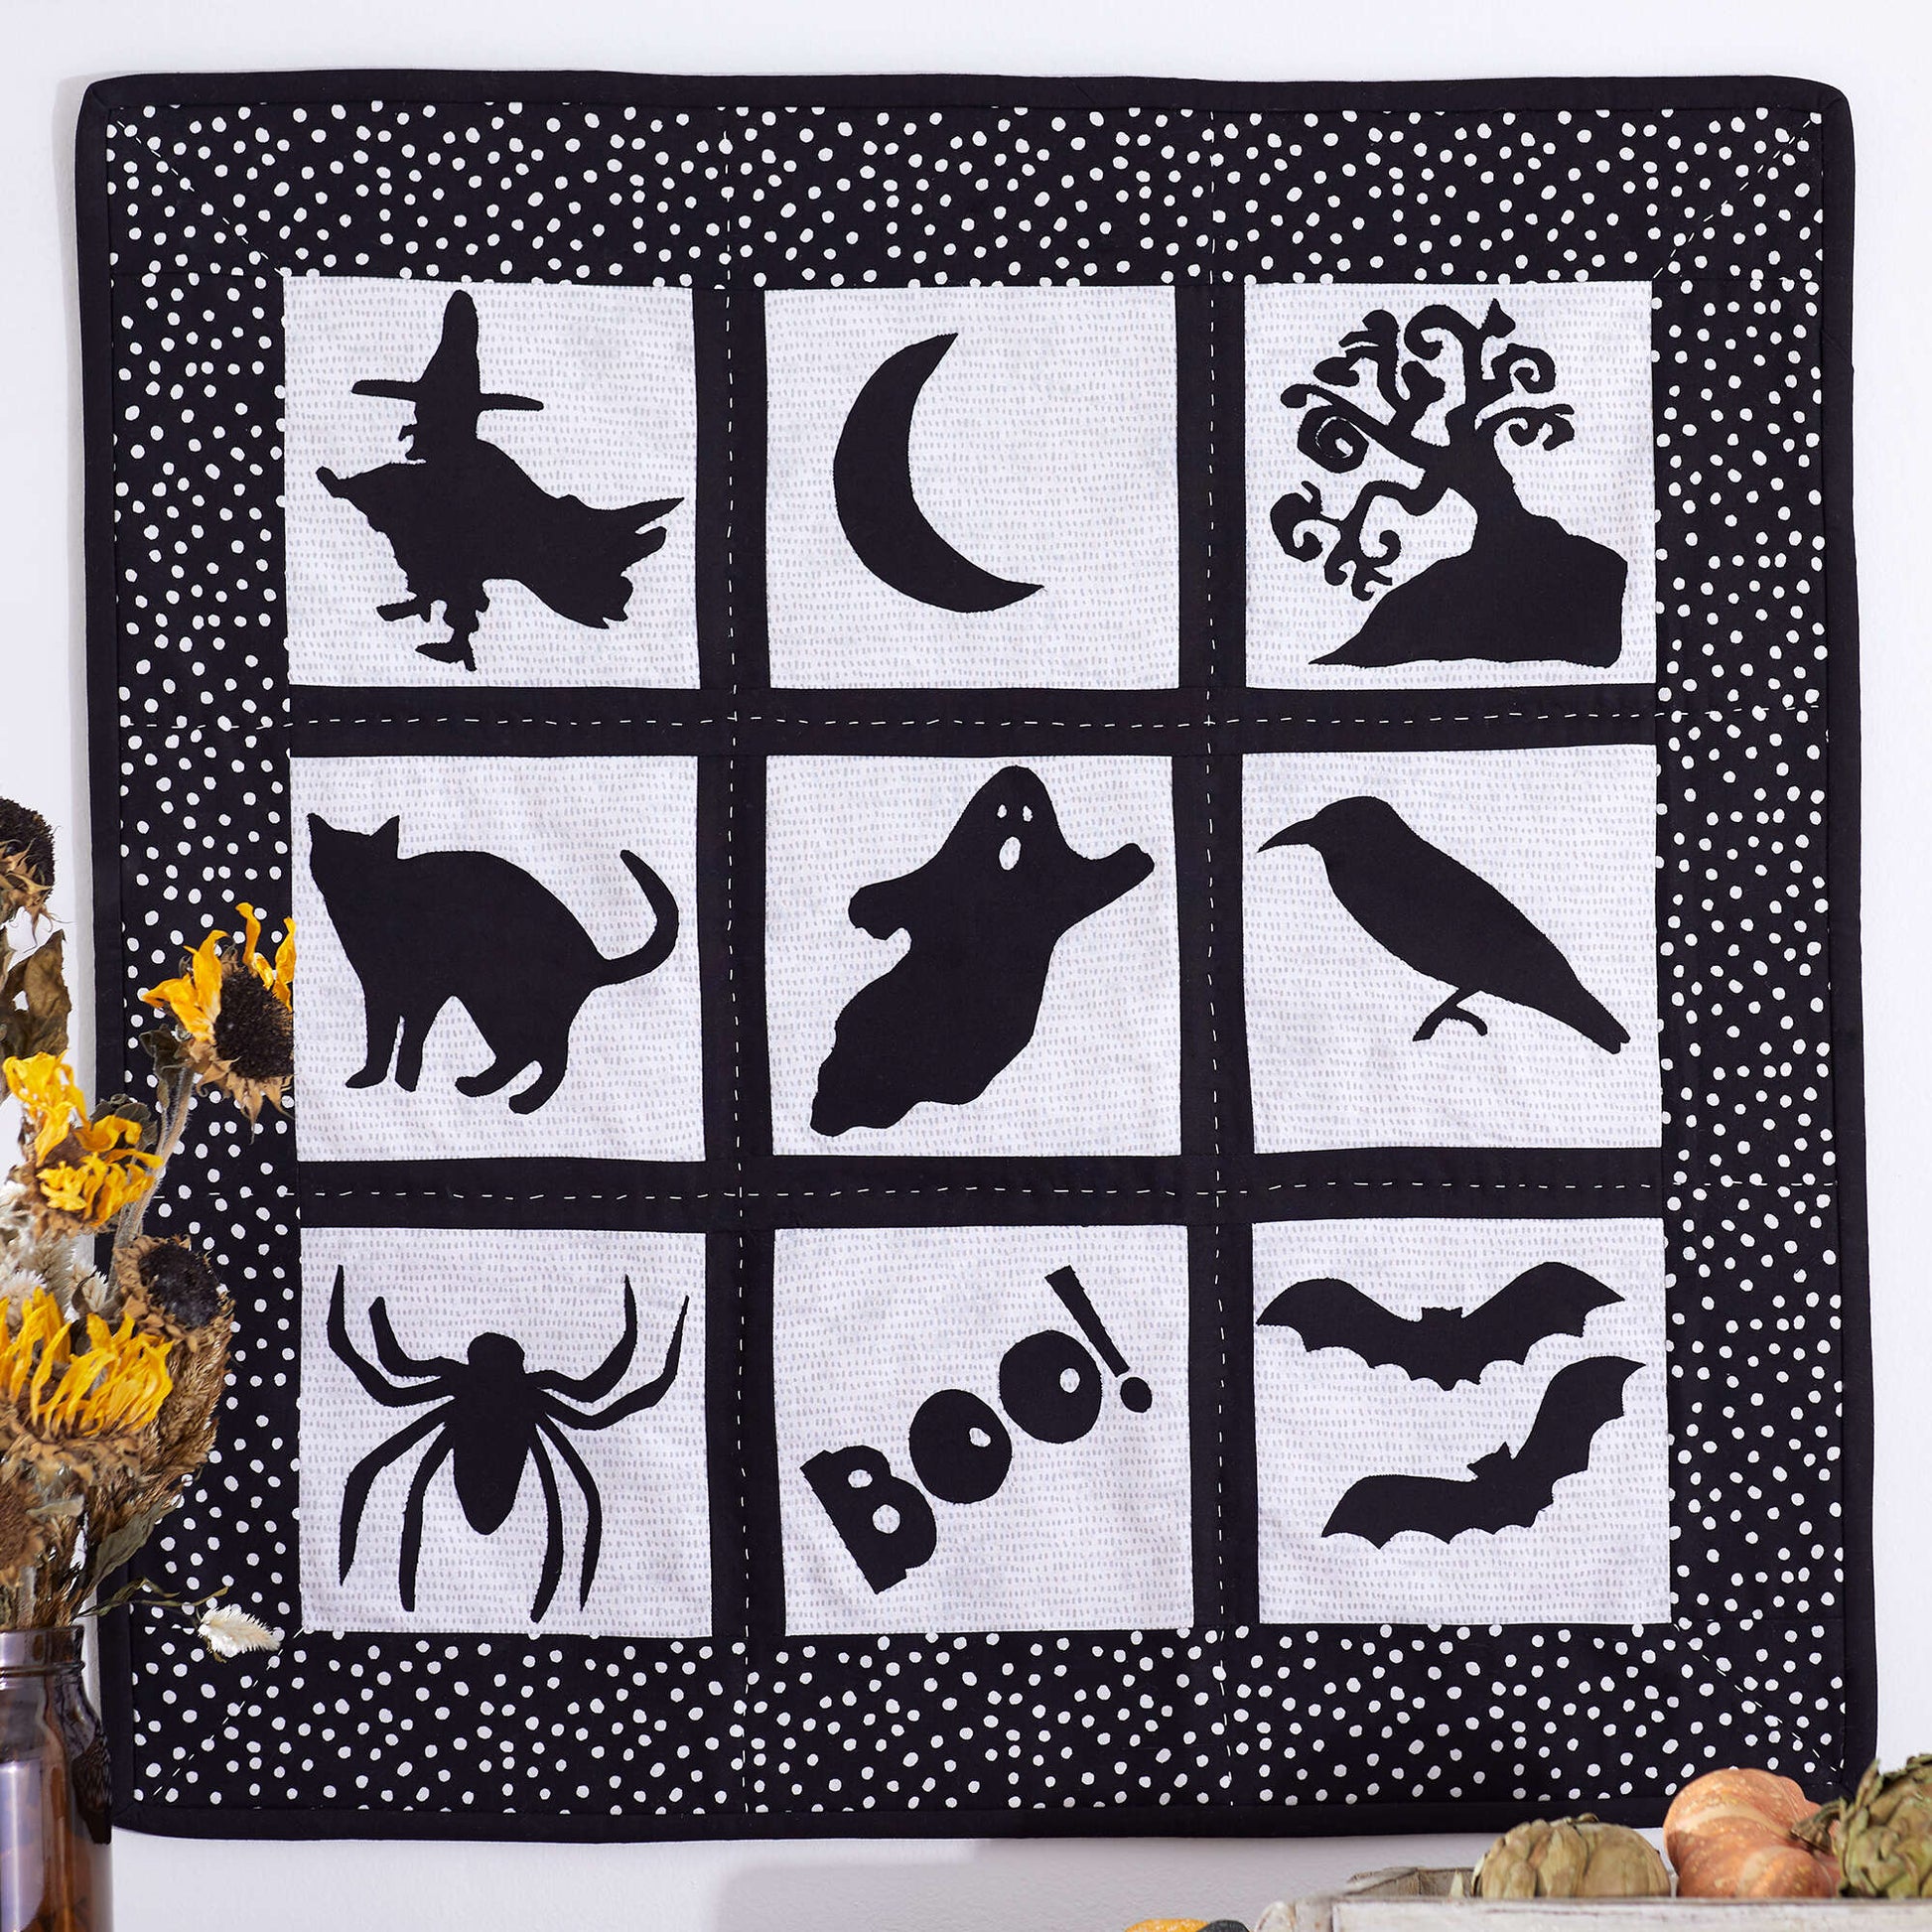 Free Coats & Clark Halloween Silhouette Quilt Sewing Pattern